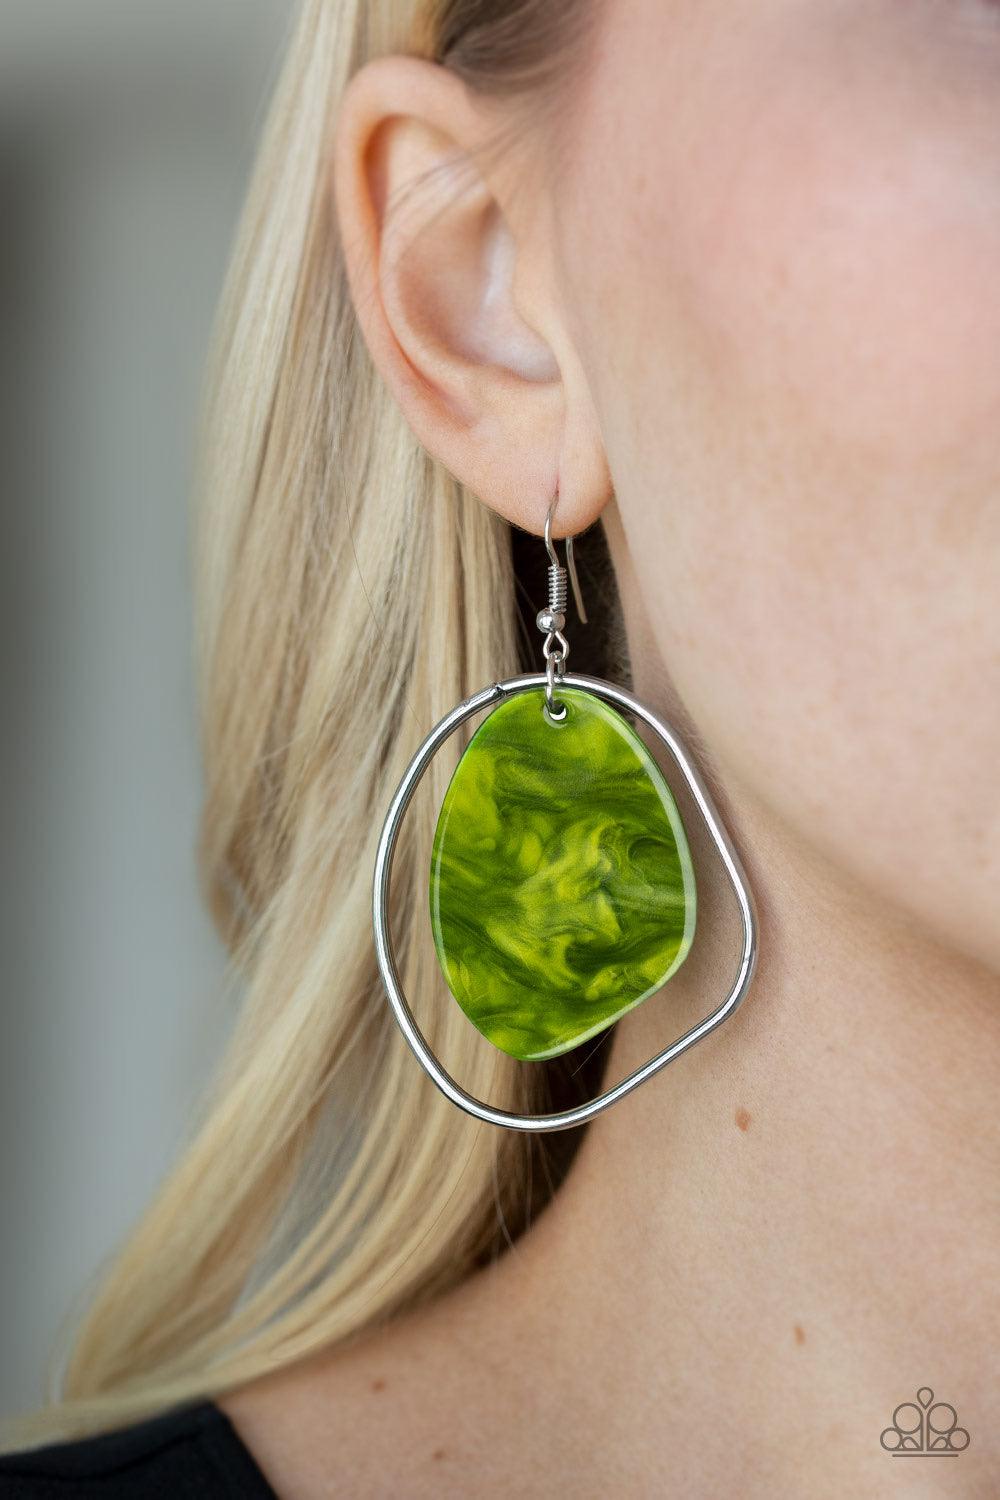 Paparazzi Accessories HAUTE Toddy - Green Brushed in a green shell-like iridescence, an abstract acrylic frame swings from the top of an asymmetrical silver hoop for a seasonal flair. Earring attaches to a standard fishhook fitting. Jewelry